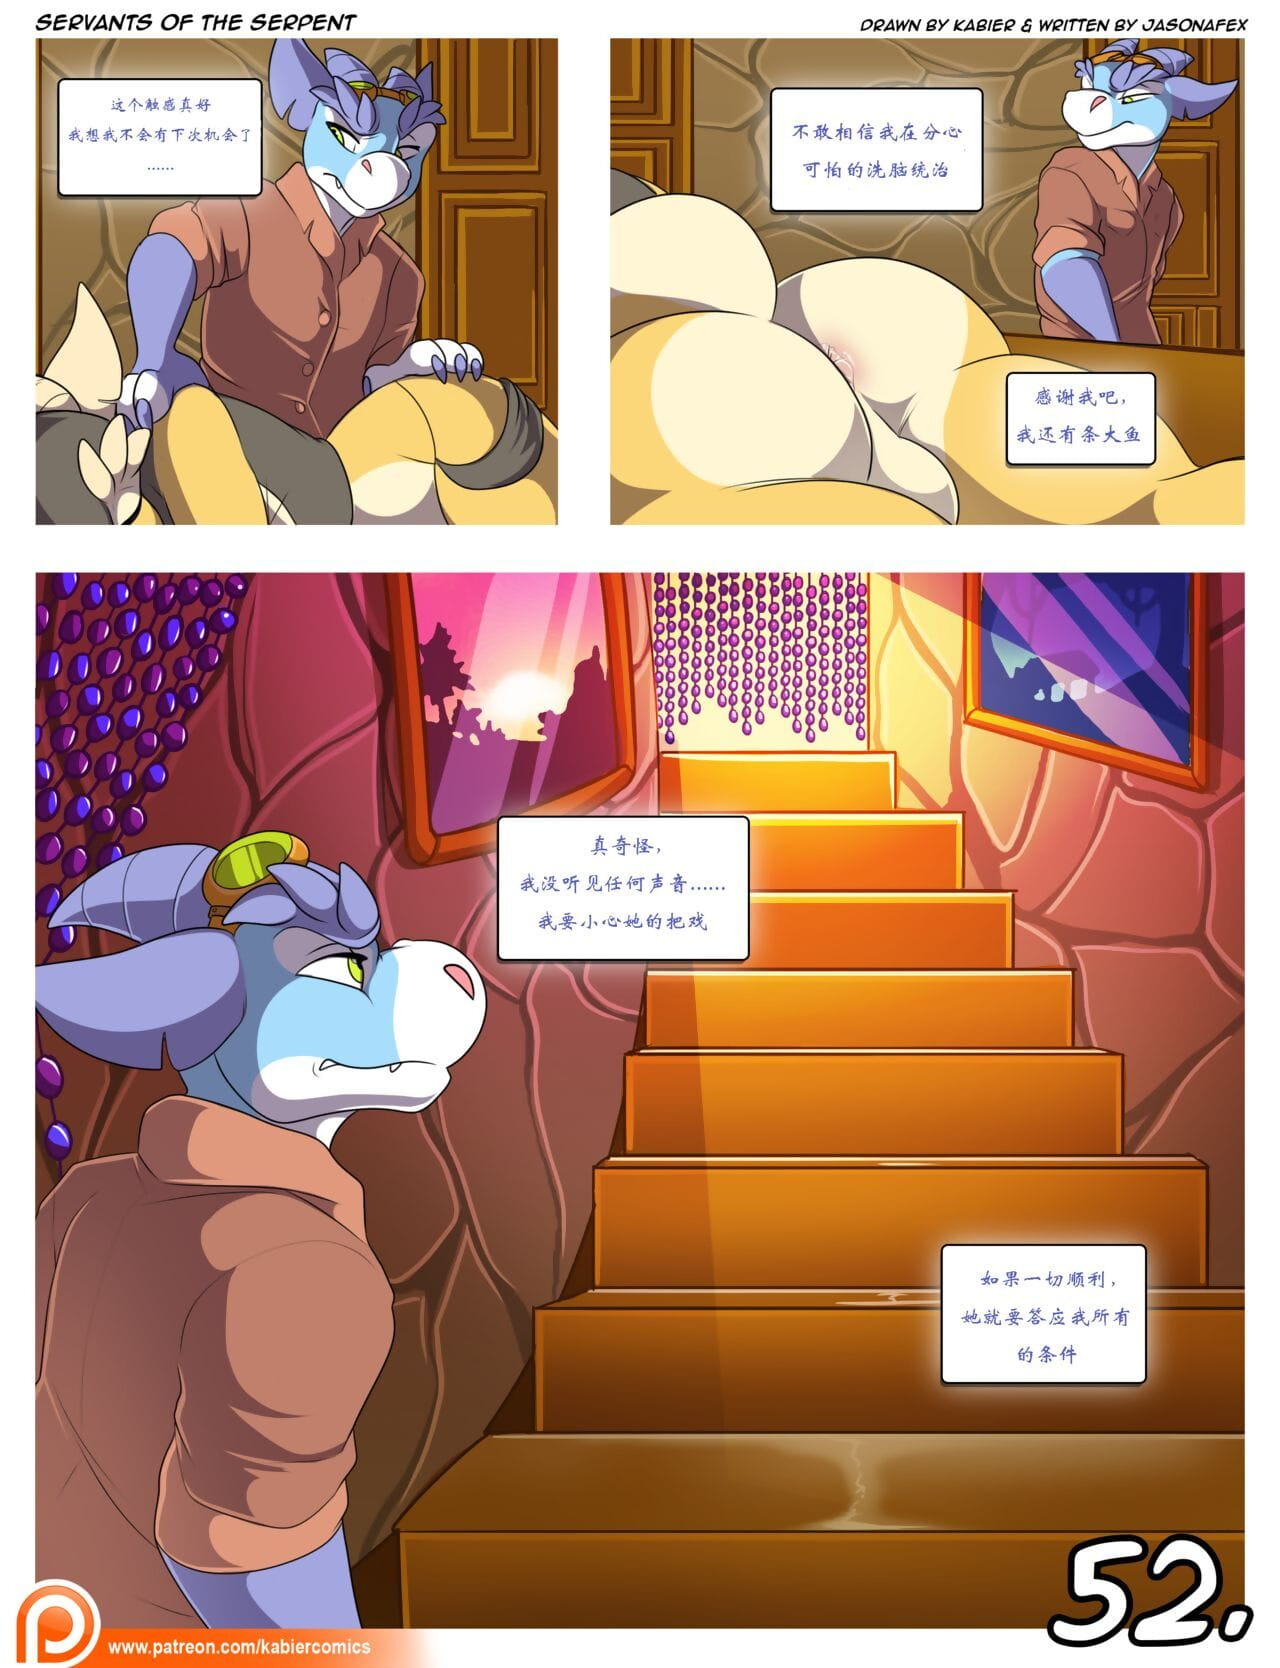 Servants of the Serpent - part 3 page 1